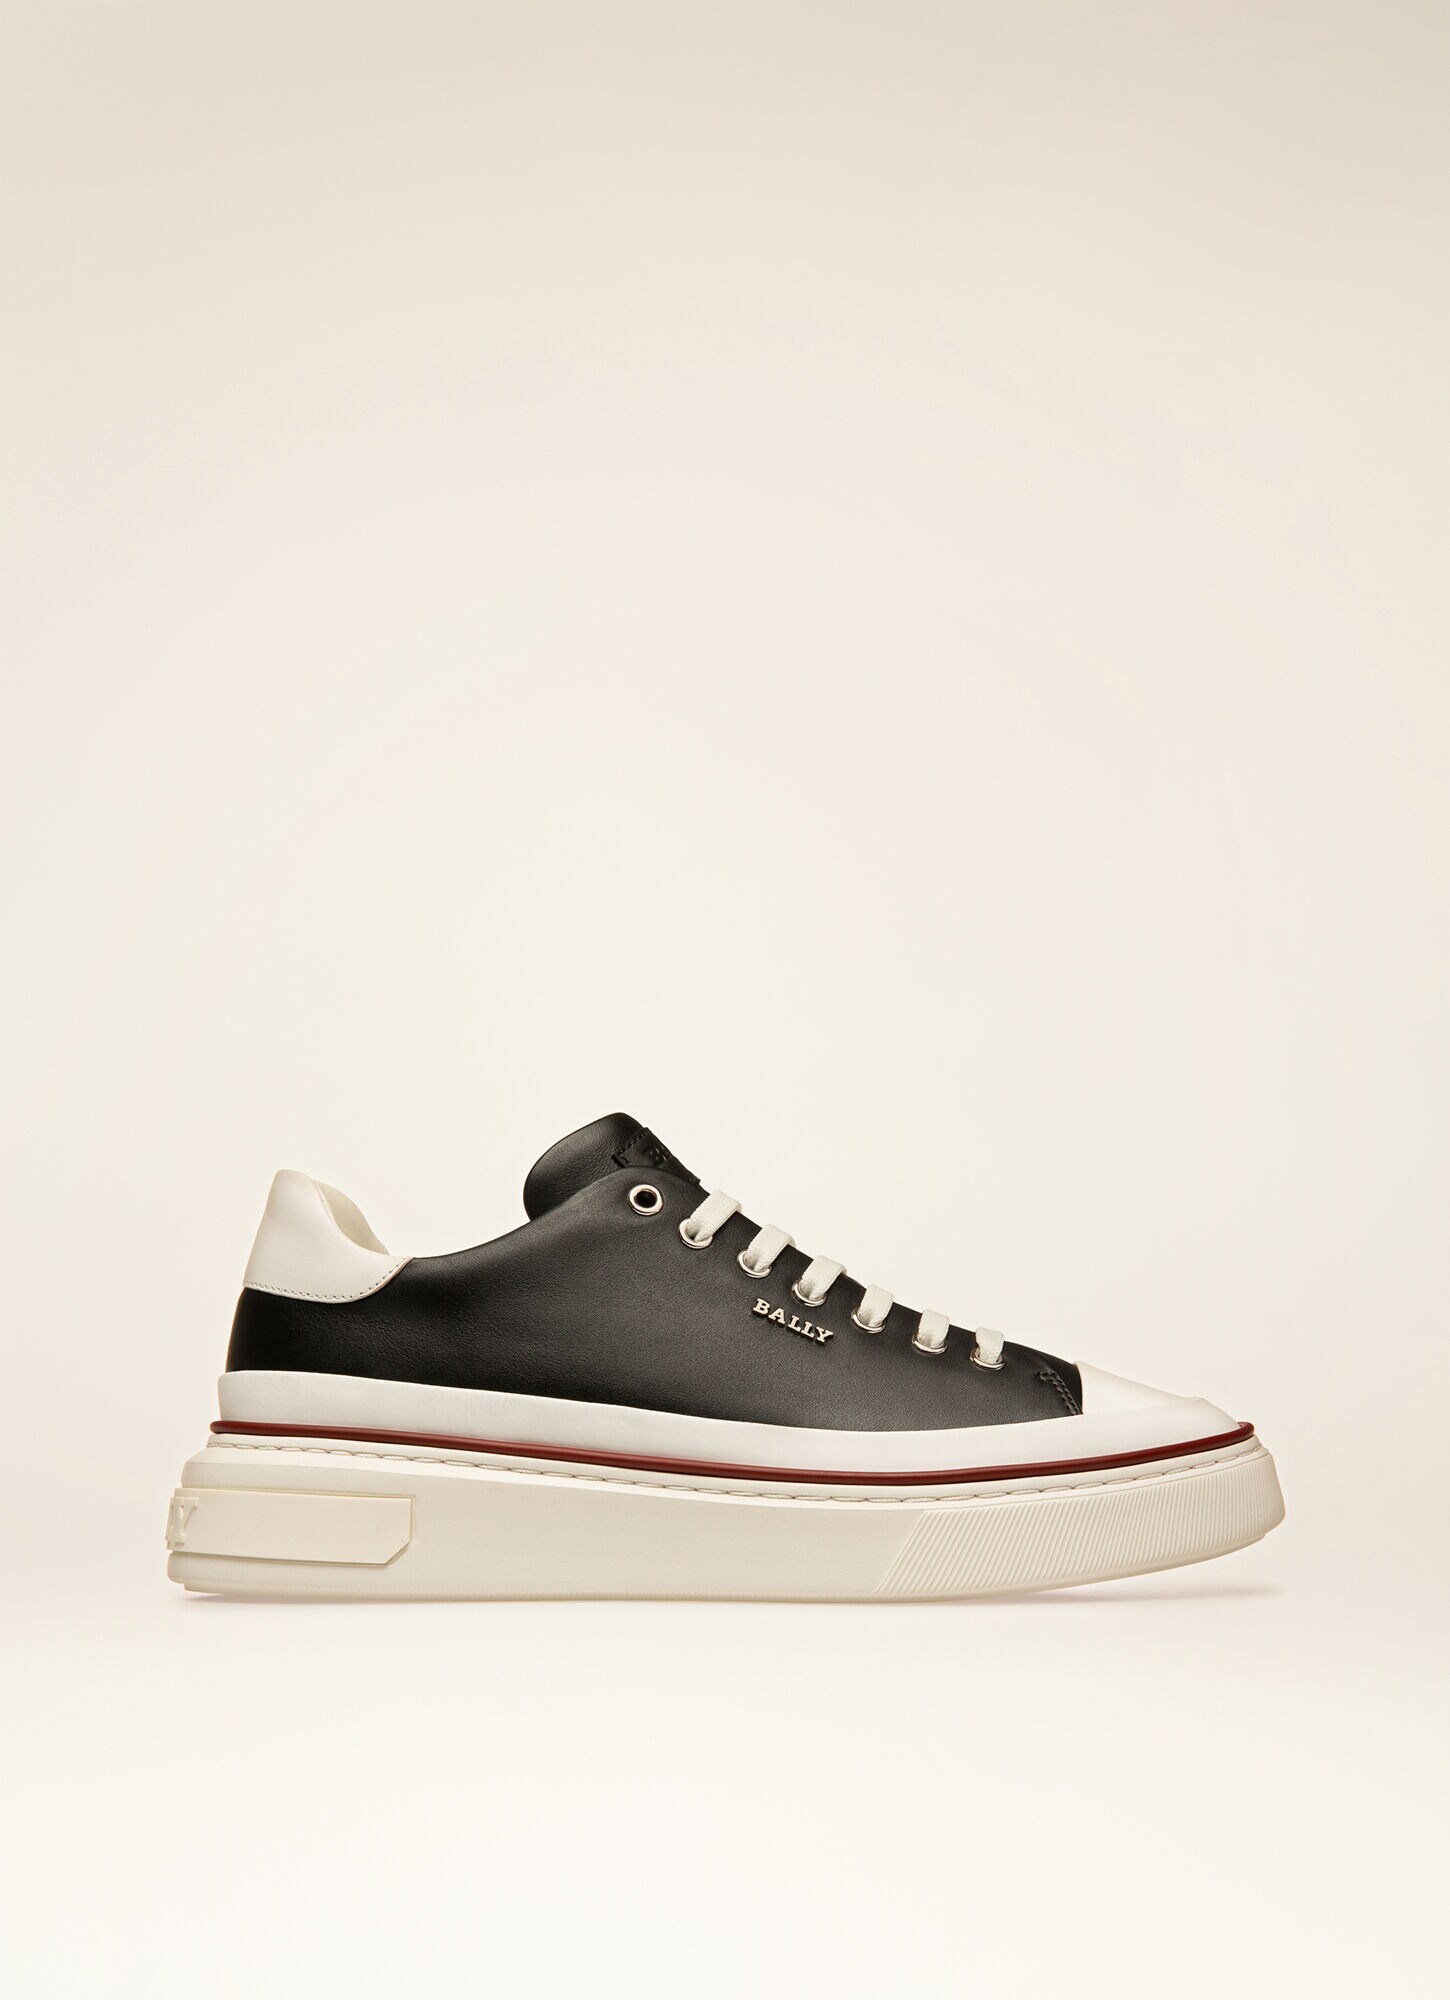 Maily | Mens Sneakers | Black & White Leather | Bally